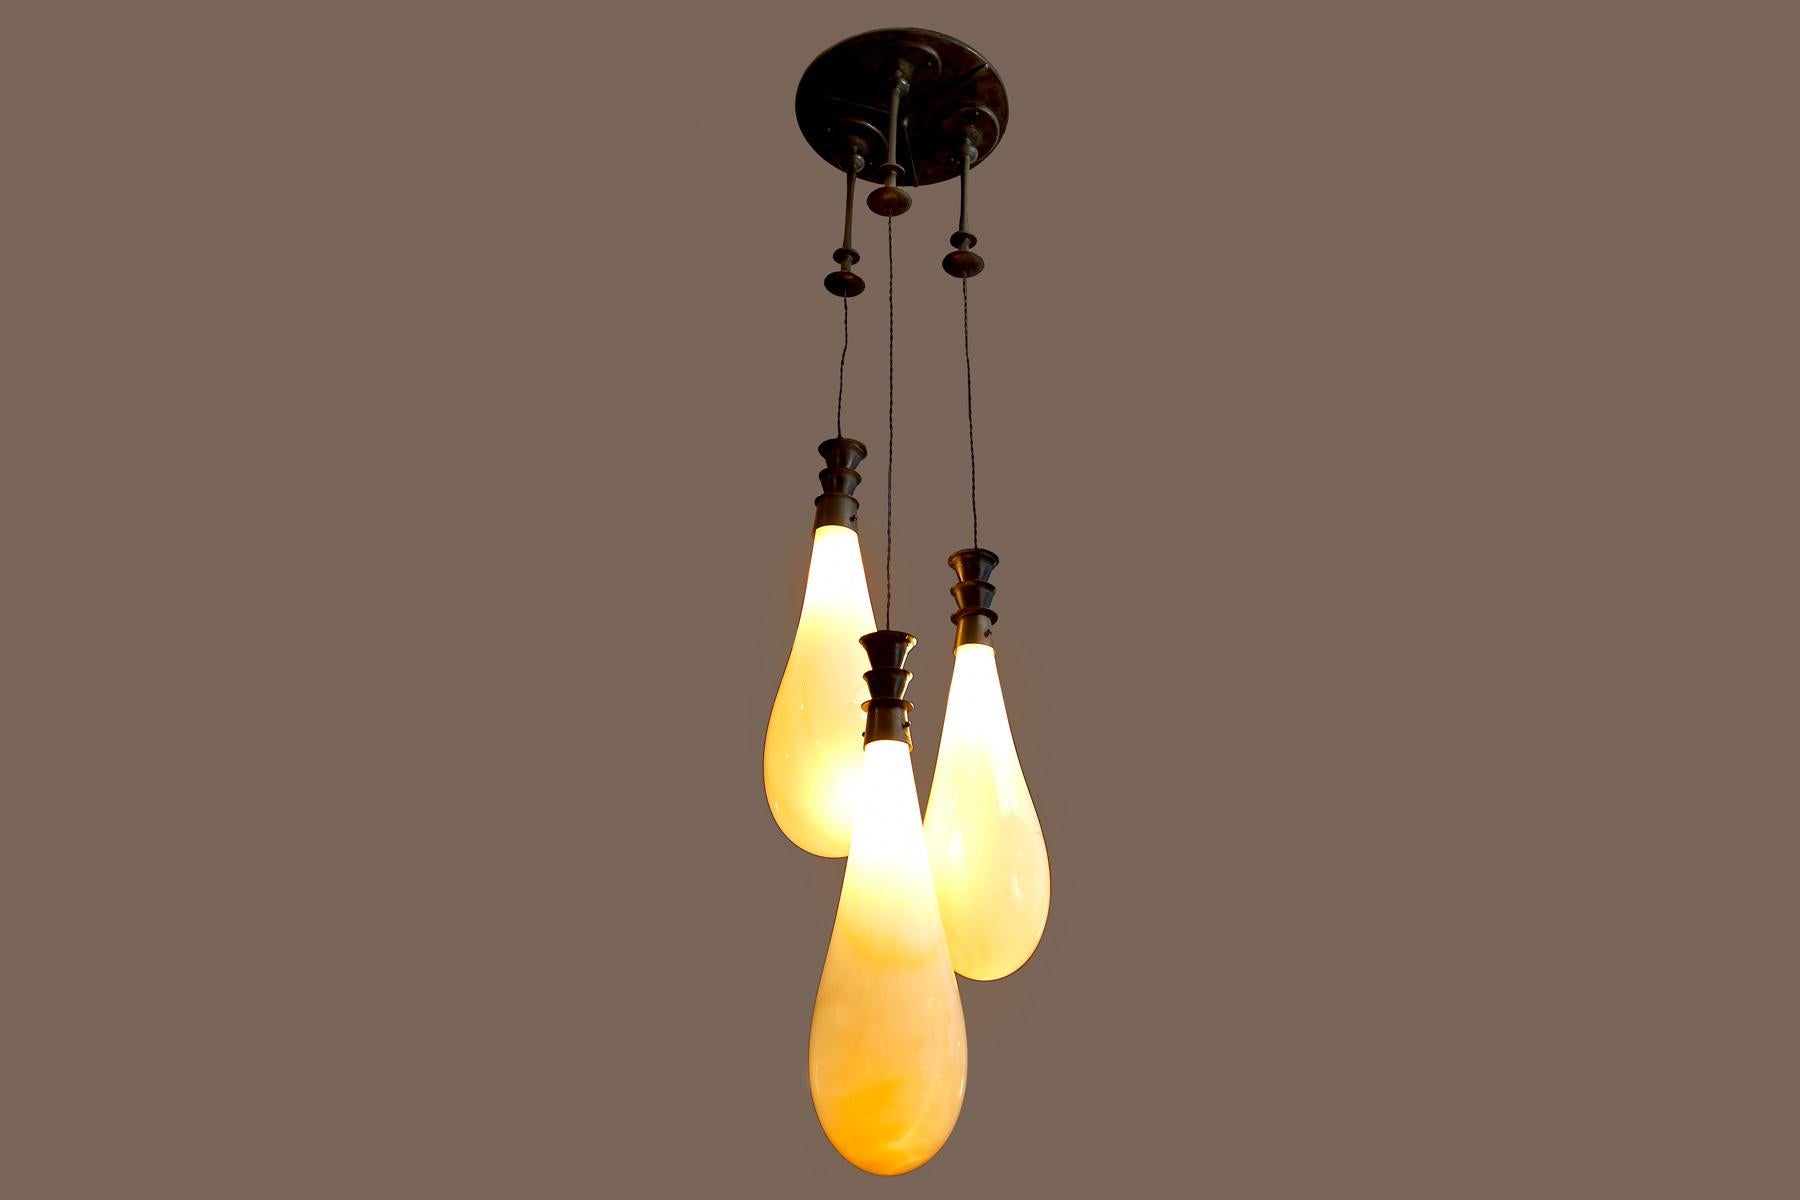 Hand Blown glass pendants, bronze patina fixtures. Nickel finish Available. Custom Dimensions Available.